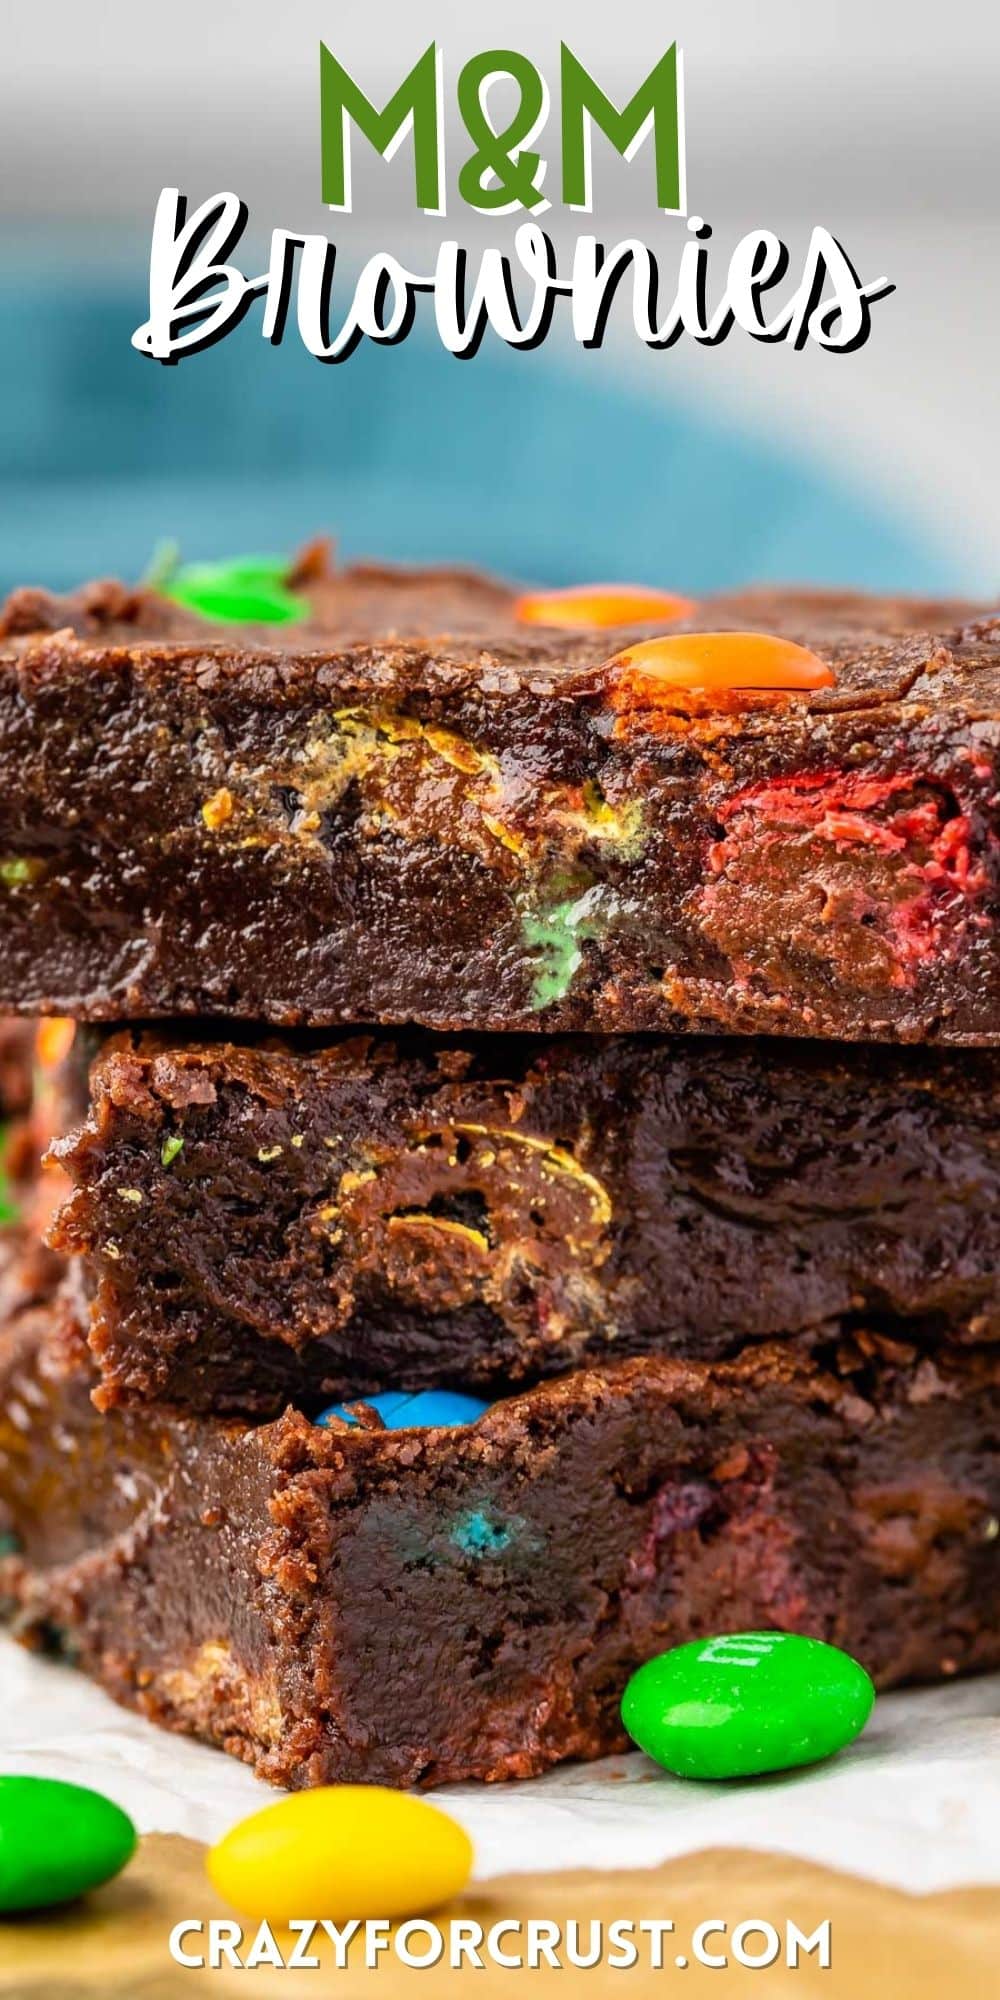 stacked brownies with colorful m&ms baked in with words on the image.